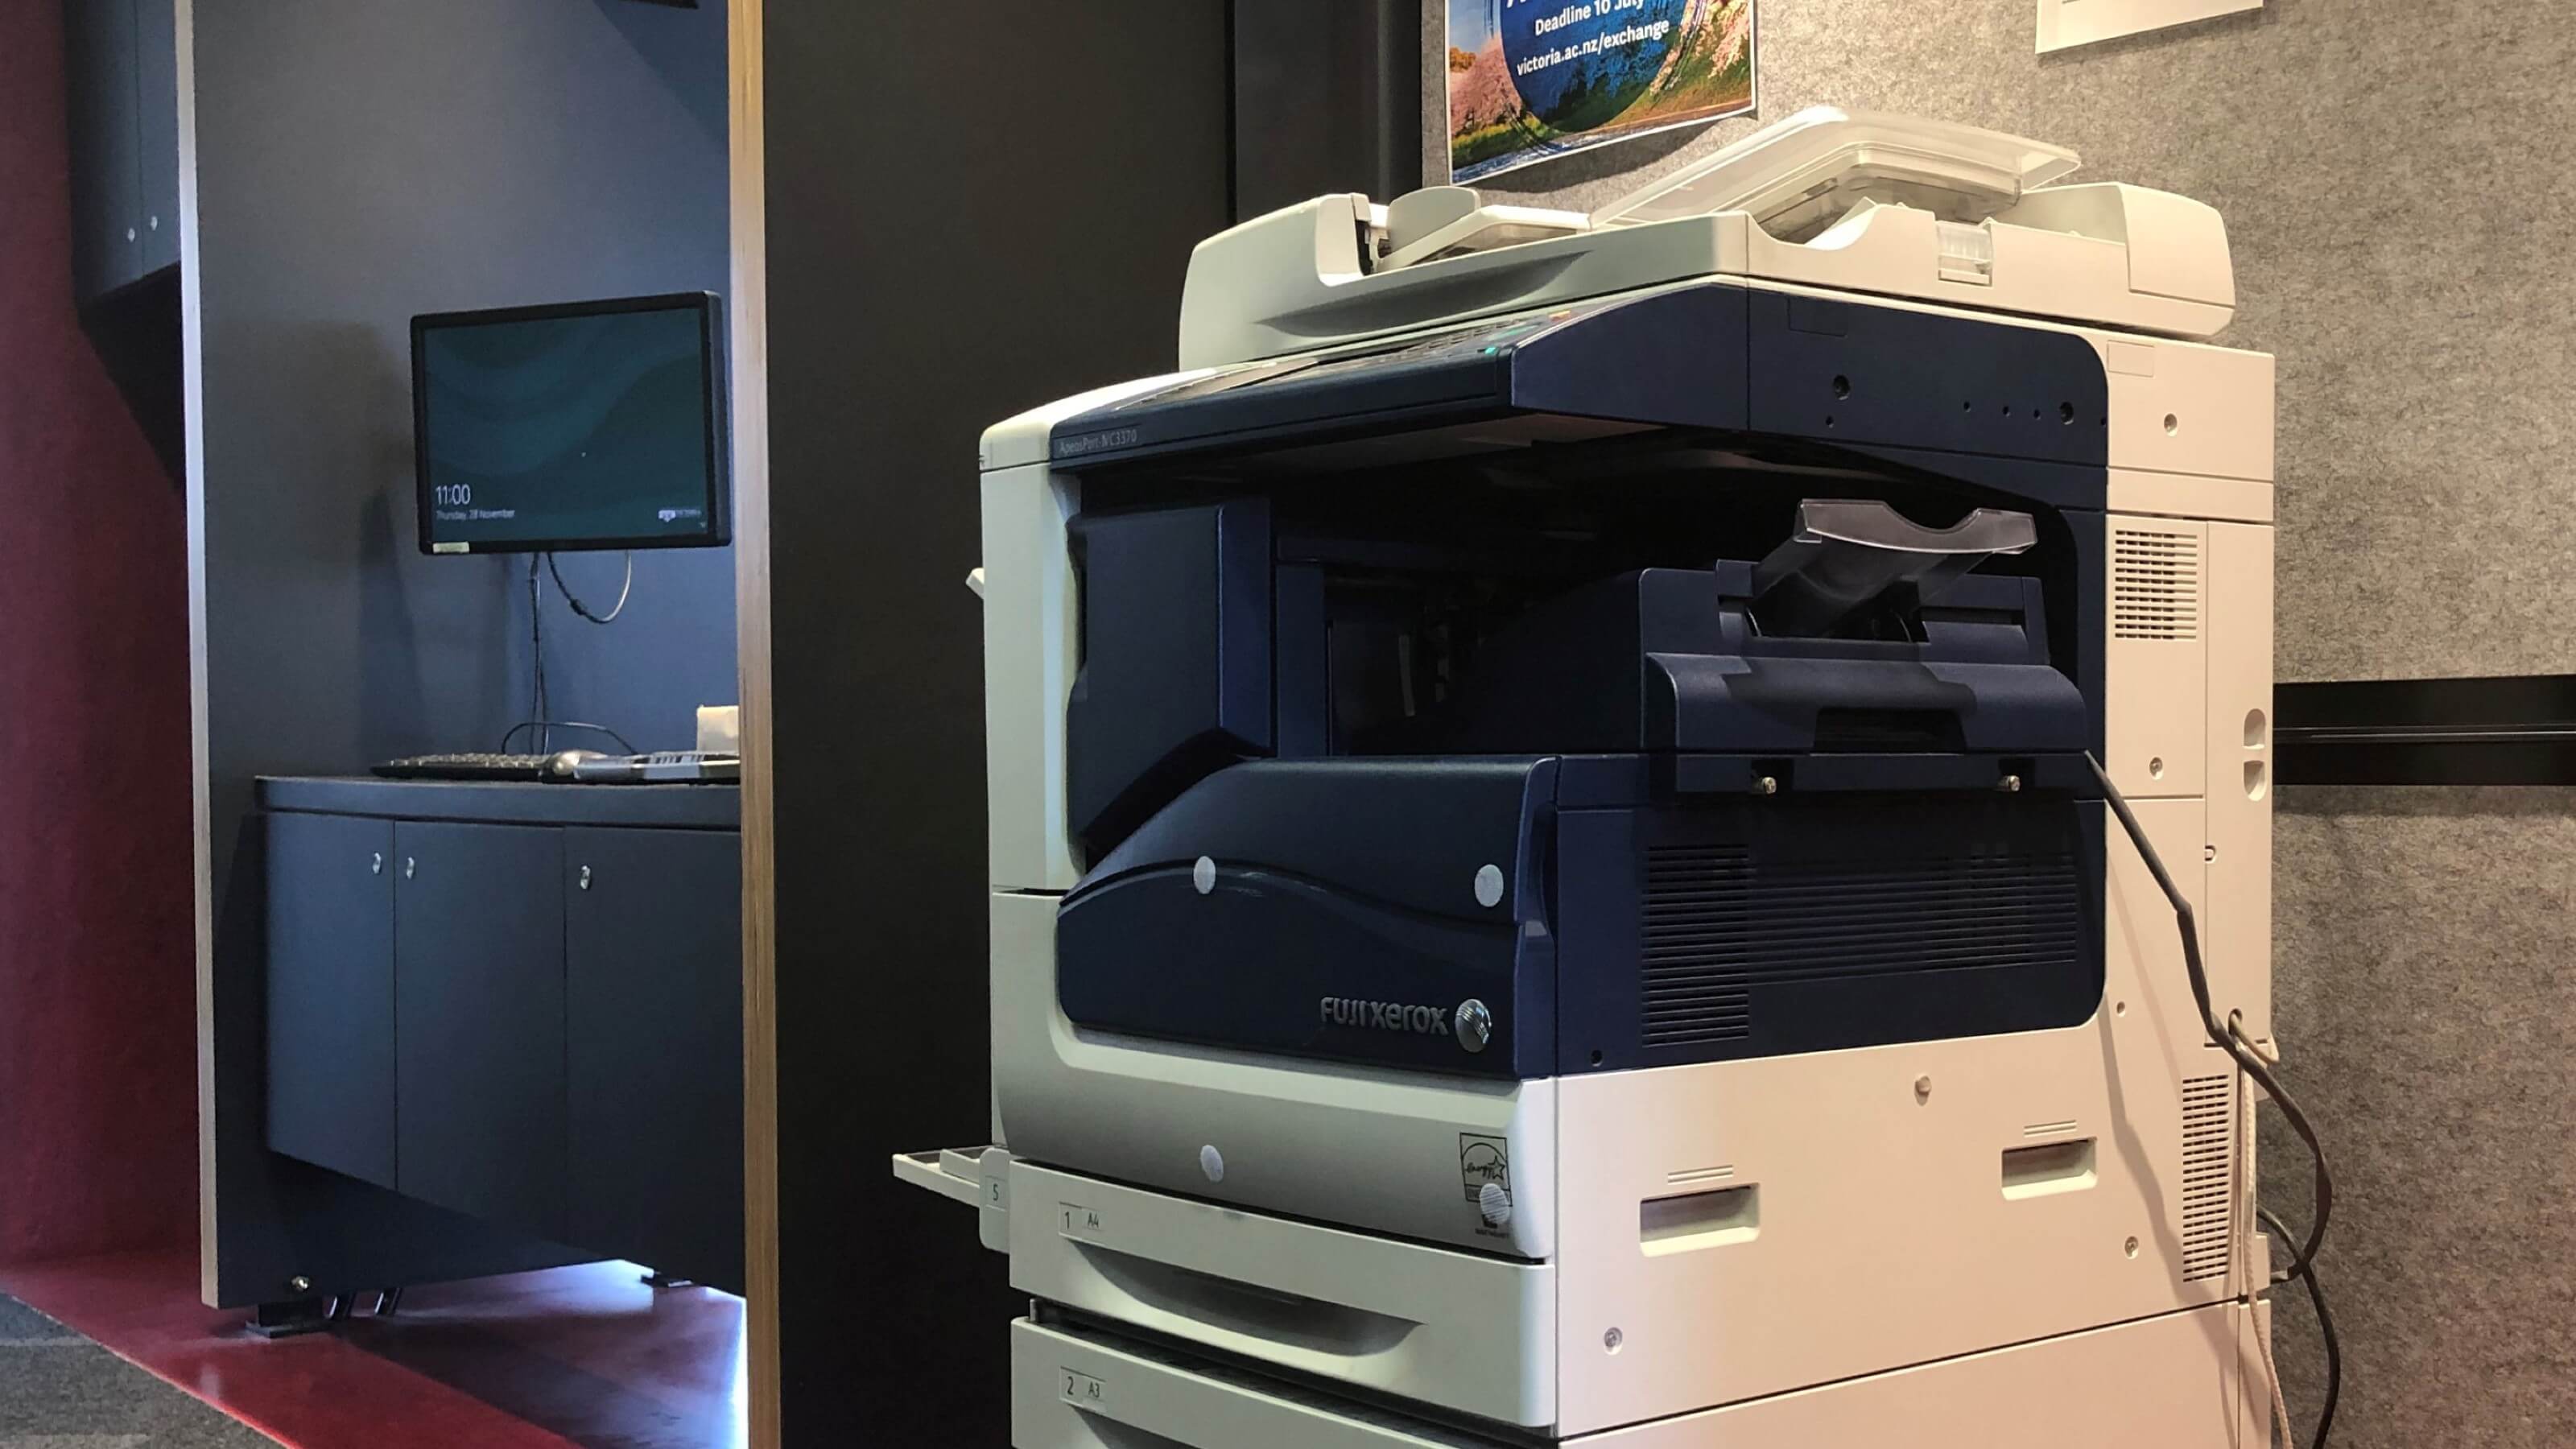 An image of multifunction printer/photocopier in the library.